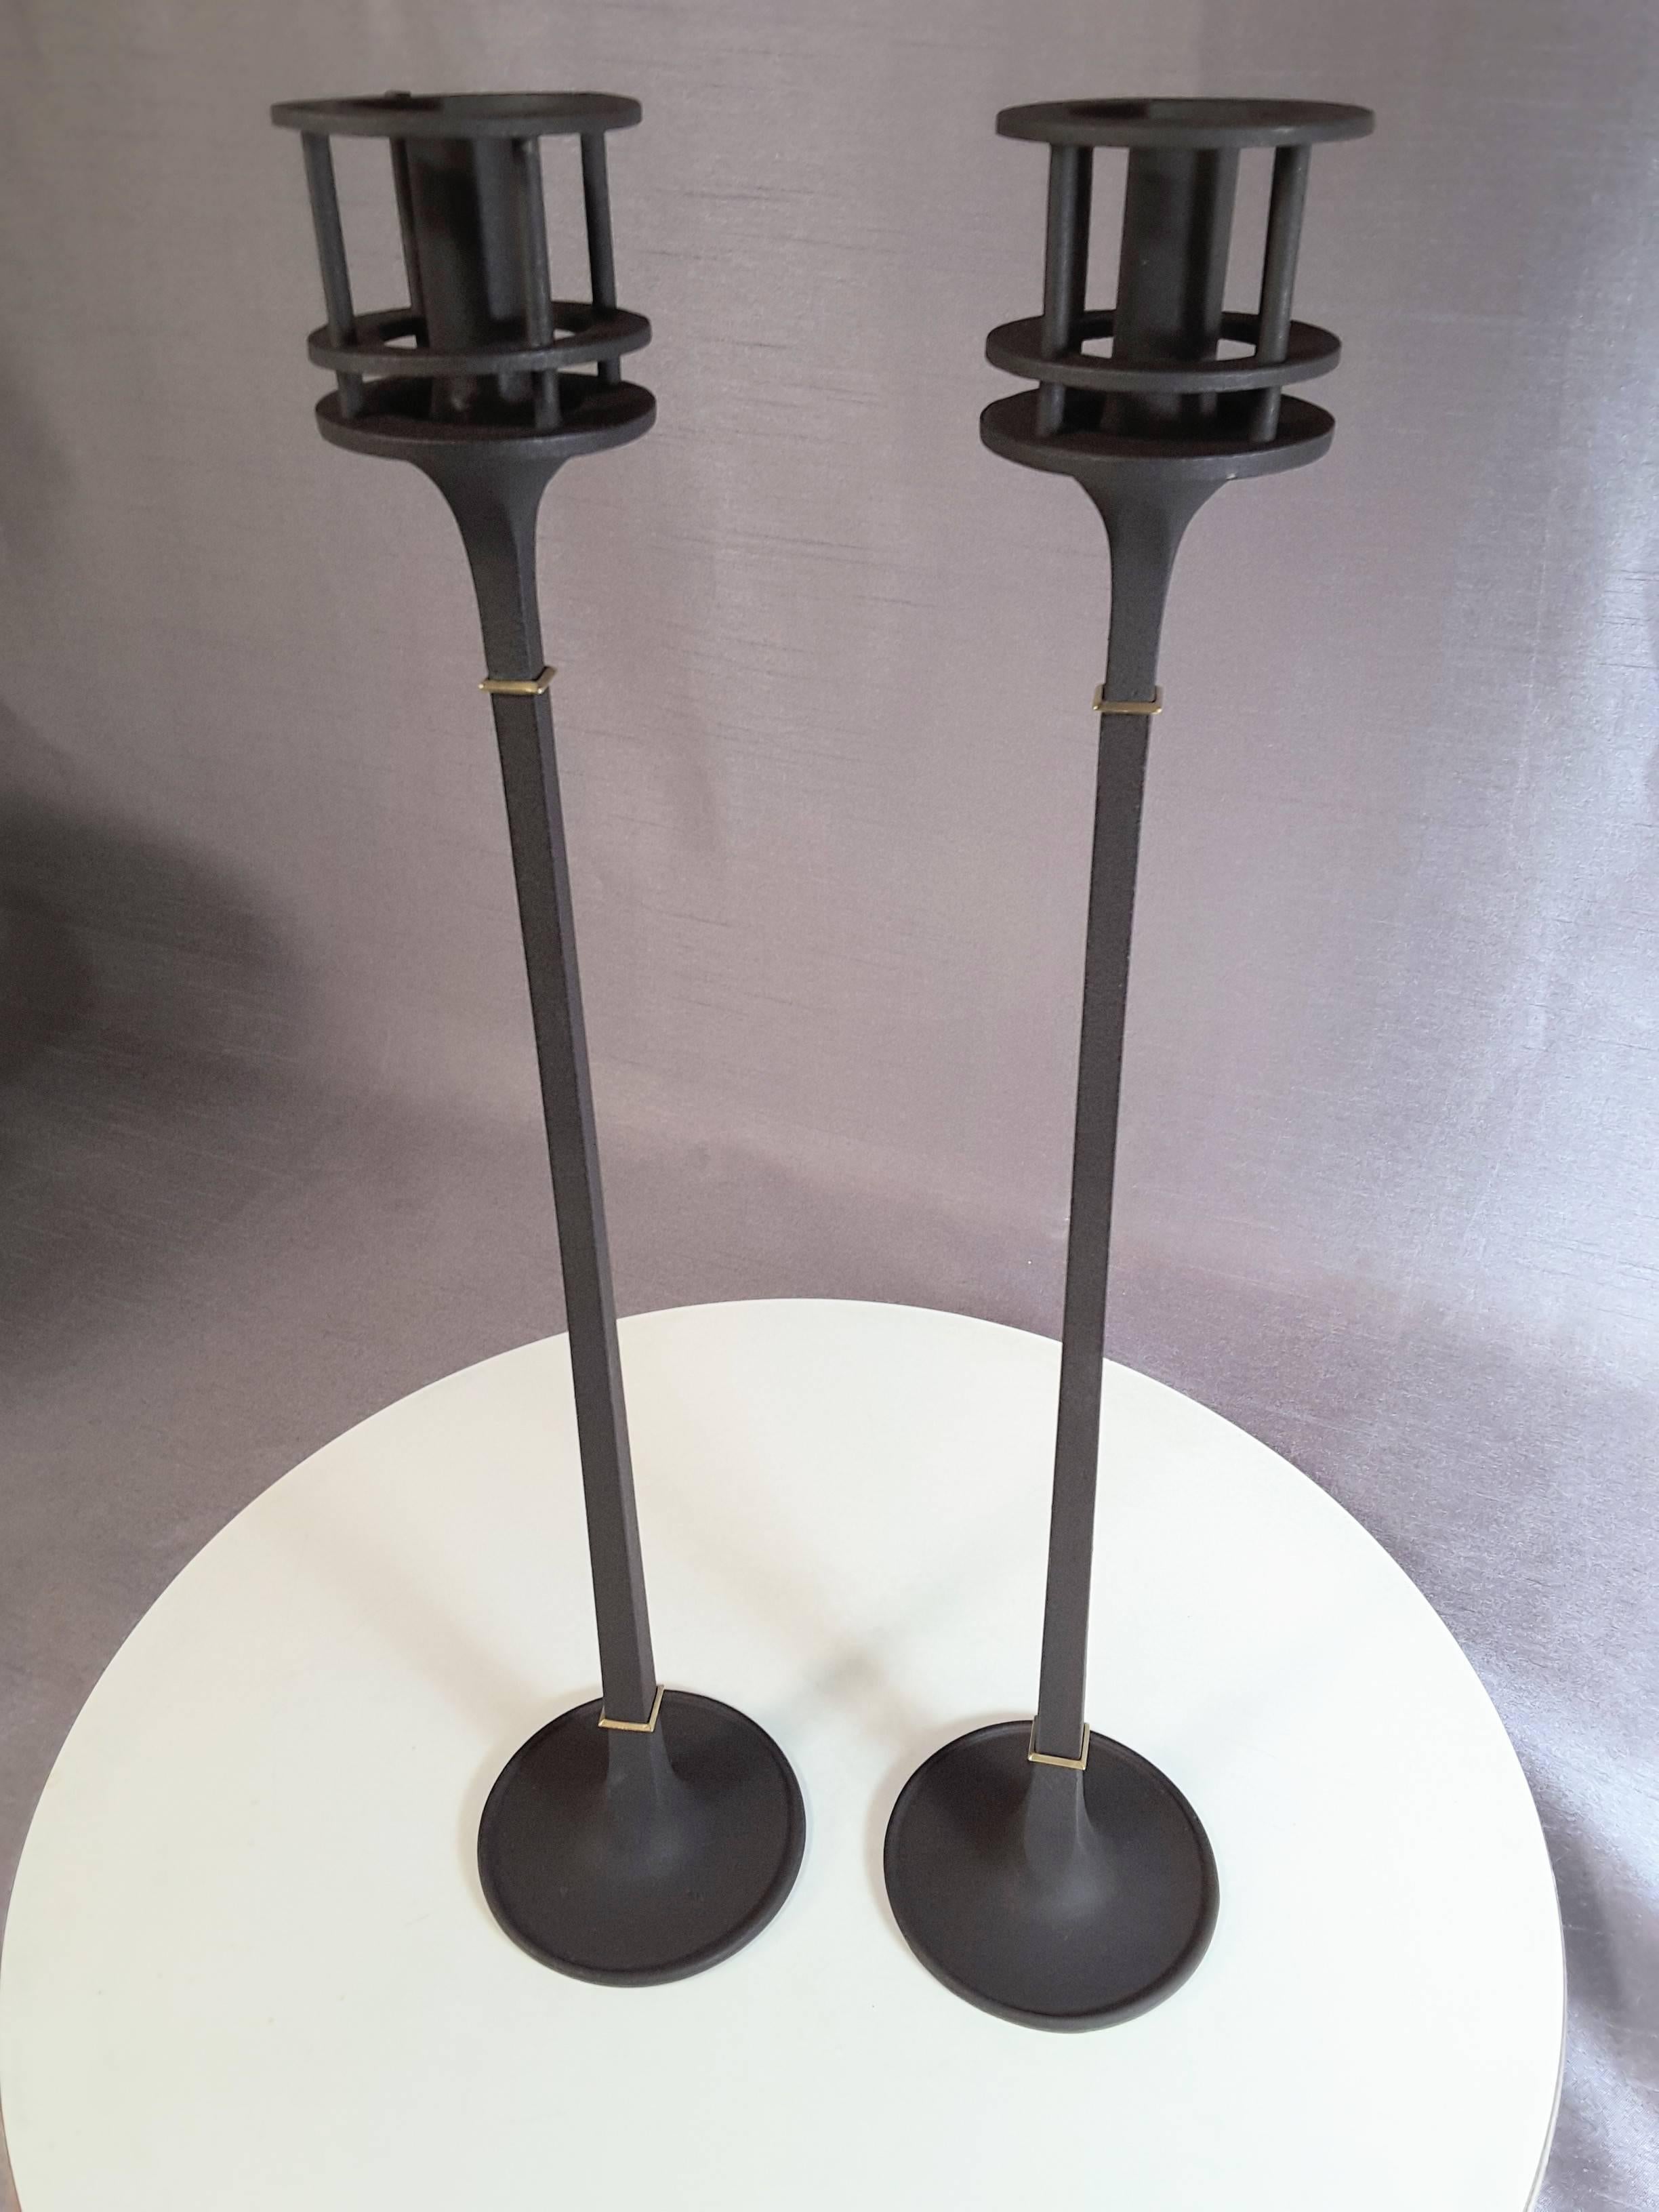 Dansk Designs 1960s iron candlesticks by Jens Quistgaard, this Classic tall pair of elegant Mid-Century Modern iron candlesticks are accented by two brass collars on a square shaft. The were designed by Jens Harald Quistgaard for Dansk and Dansk